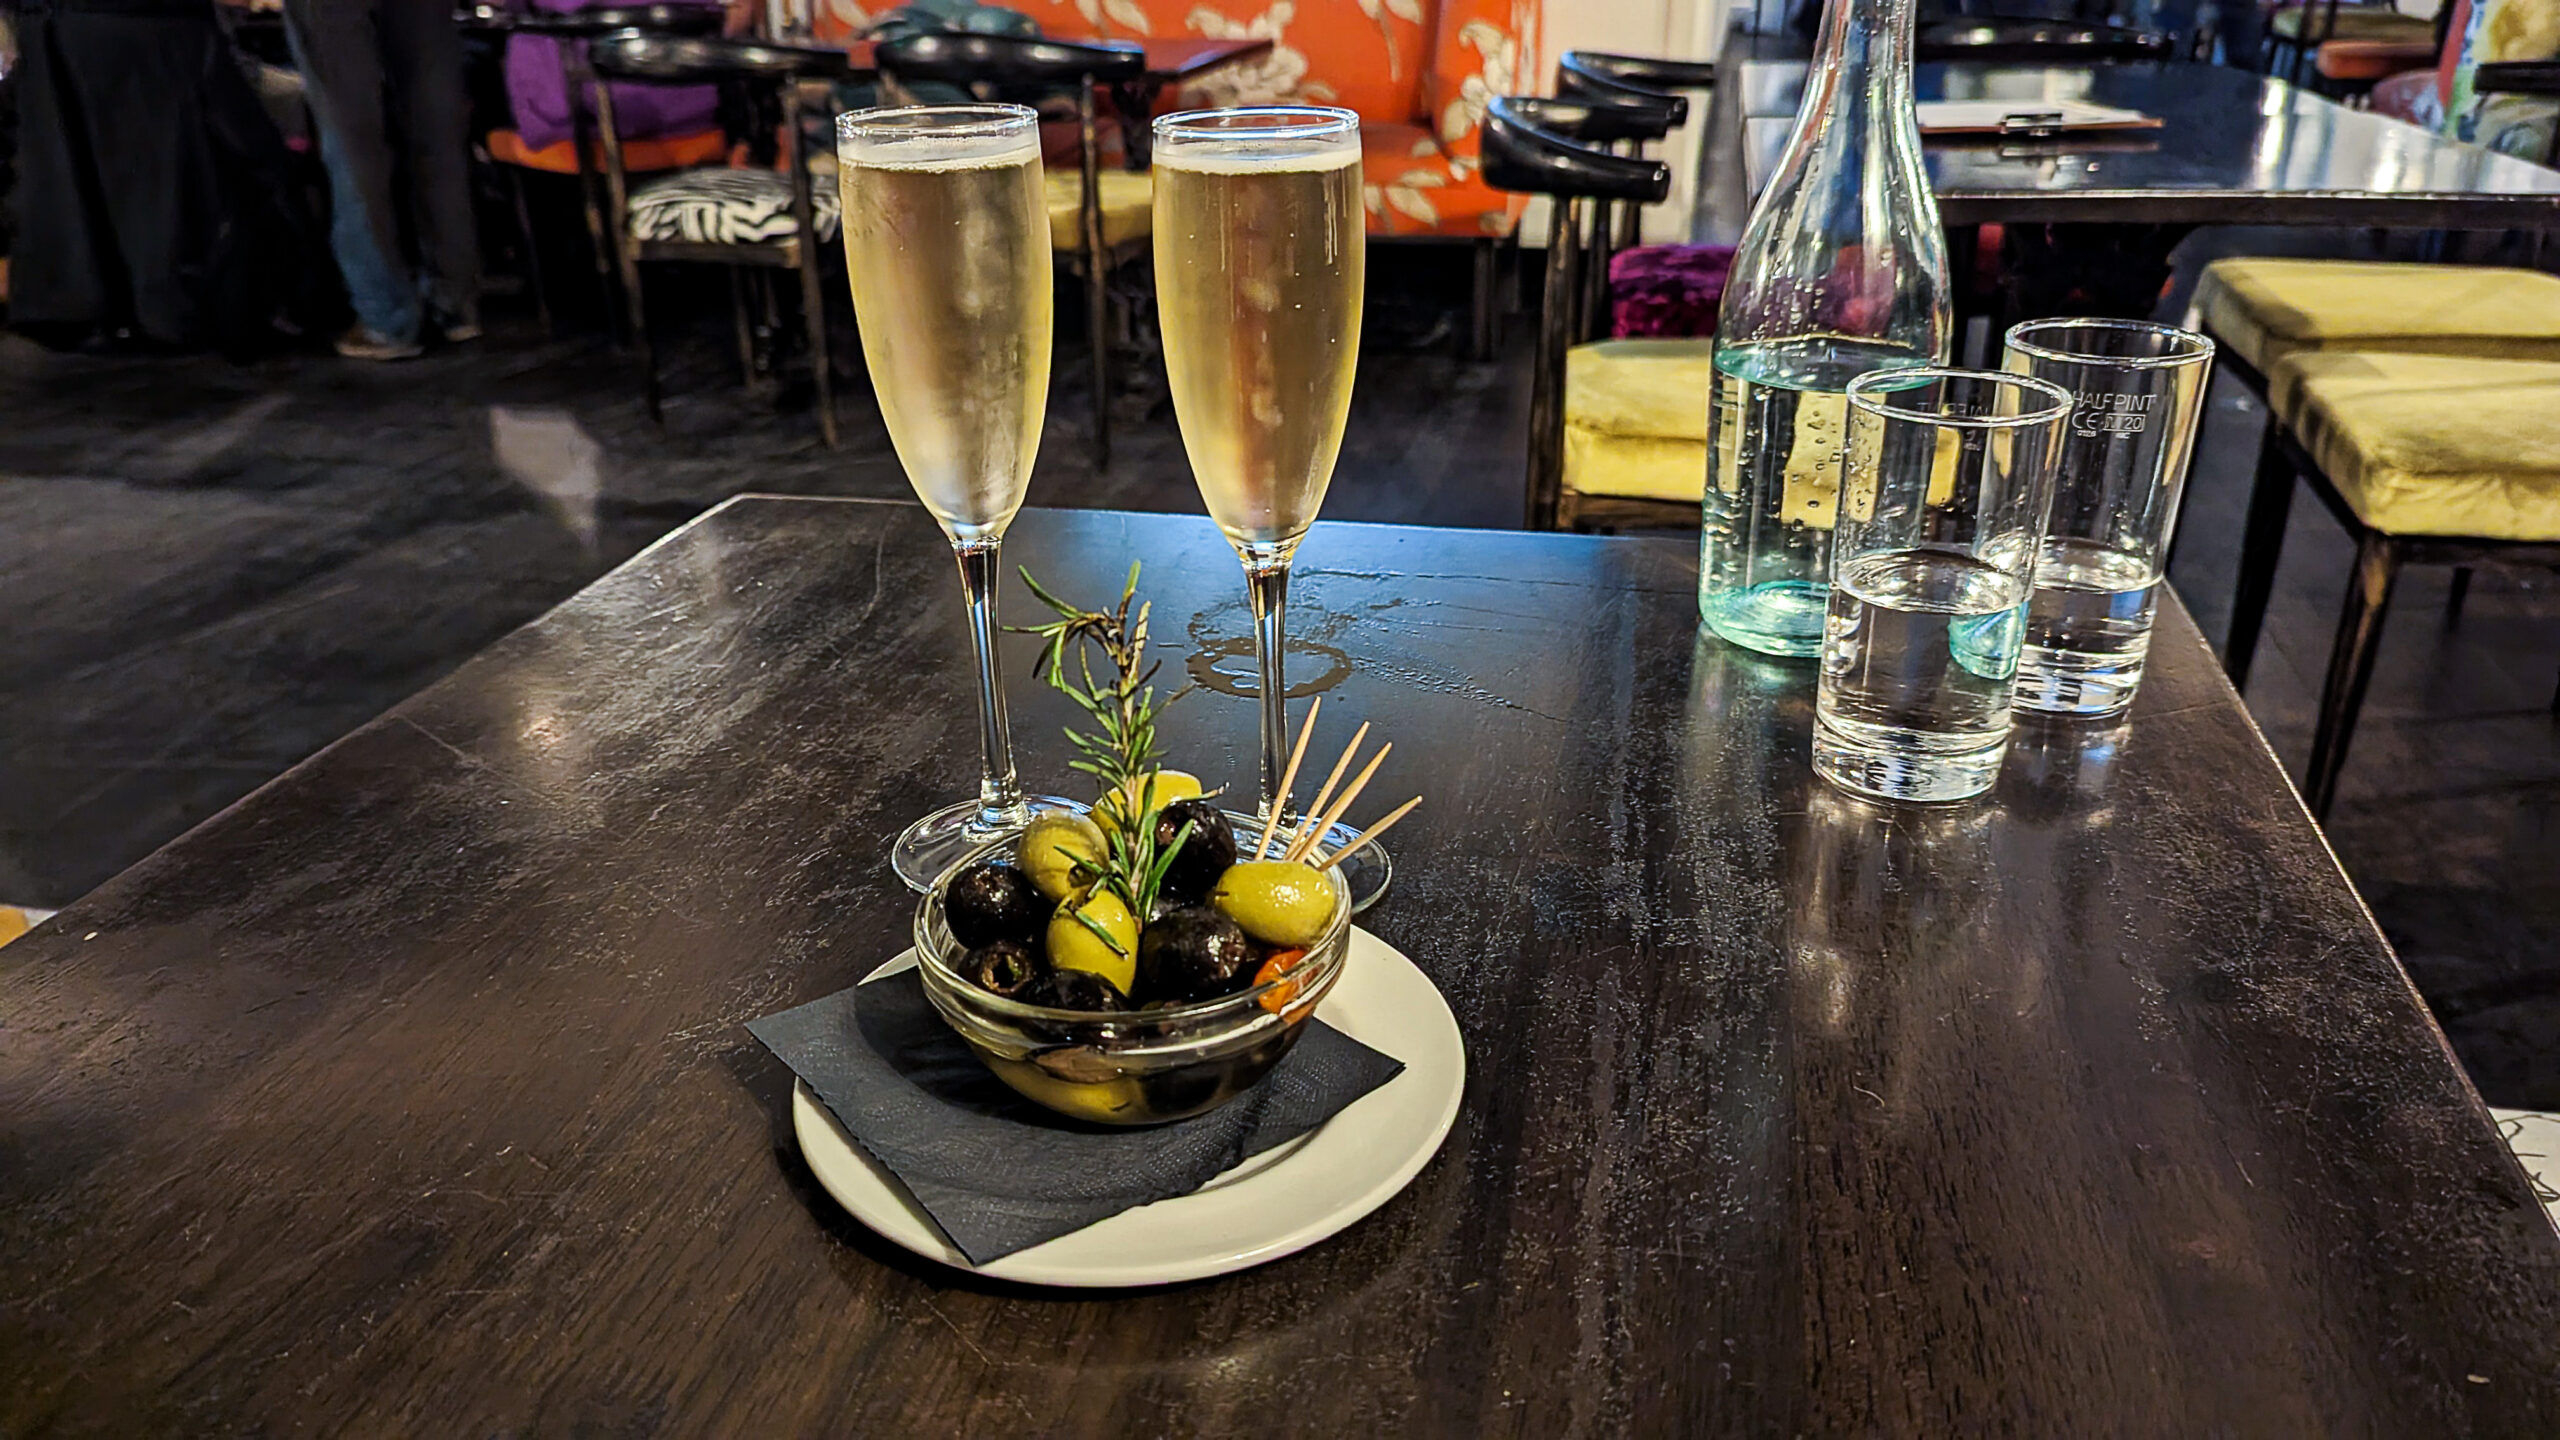 two glasses of Prosecco served with olives